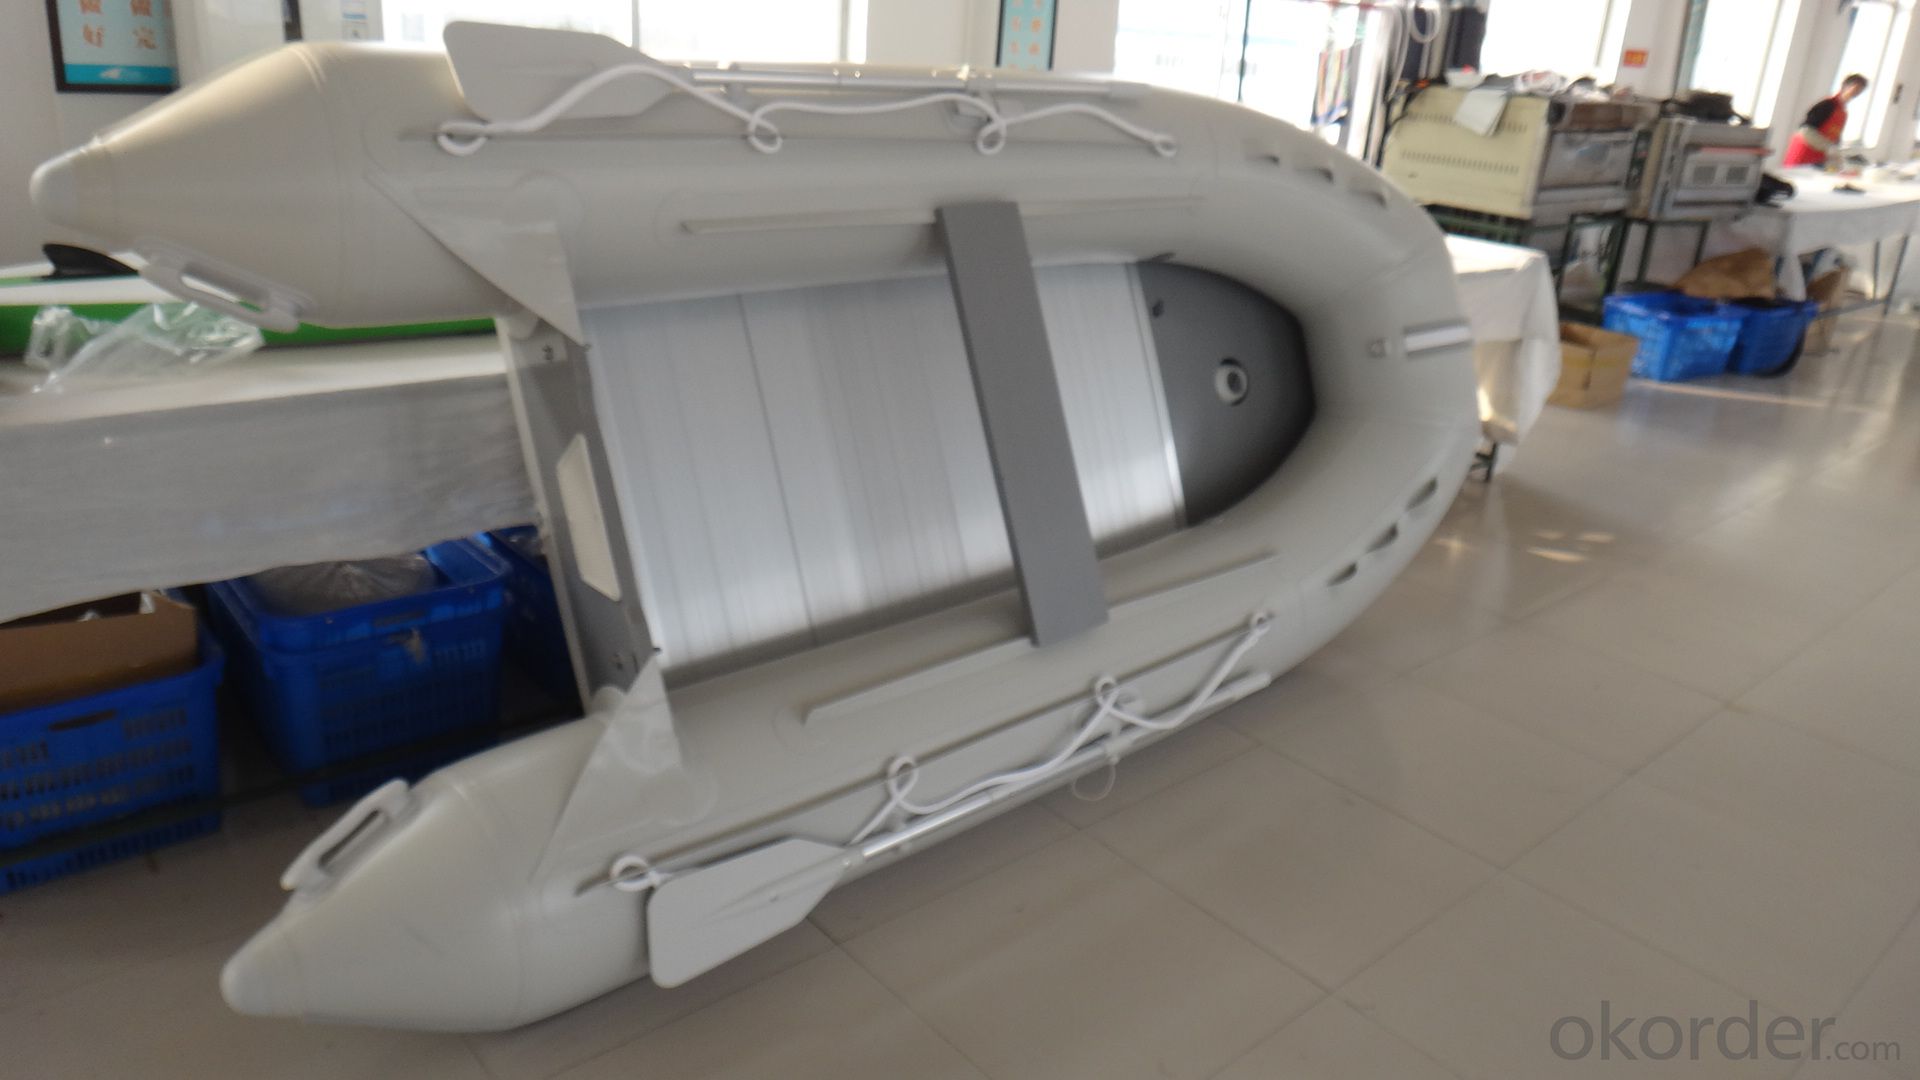 0.9mm PVC Inflatable Boat 320 with Aluminum Boat